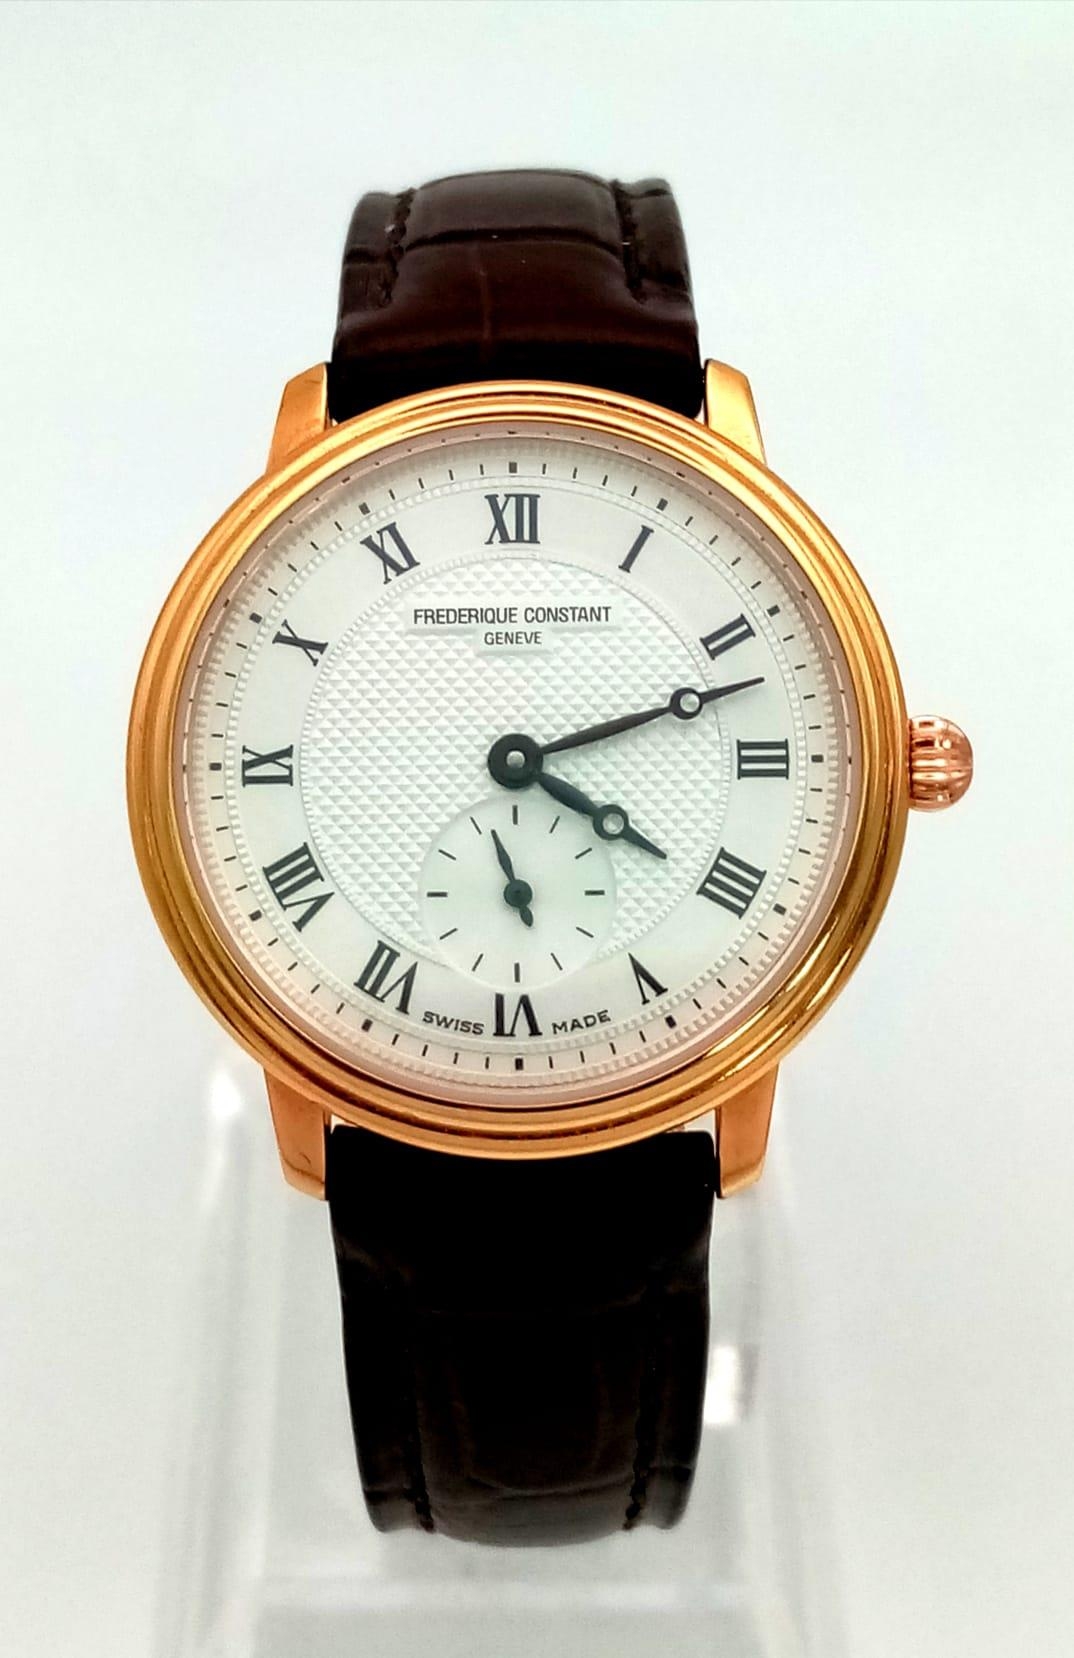 A Frederique Constant Ladies Slimline Watch. Brown leather strap. Gold plated case - 28mm. White